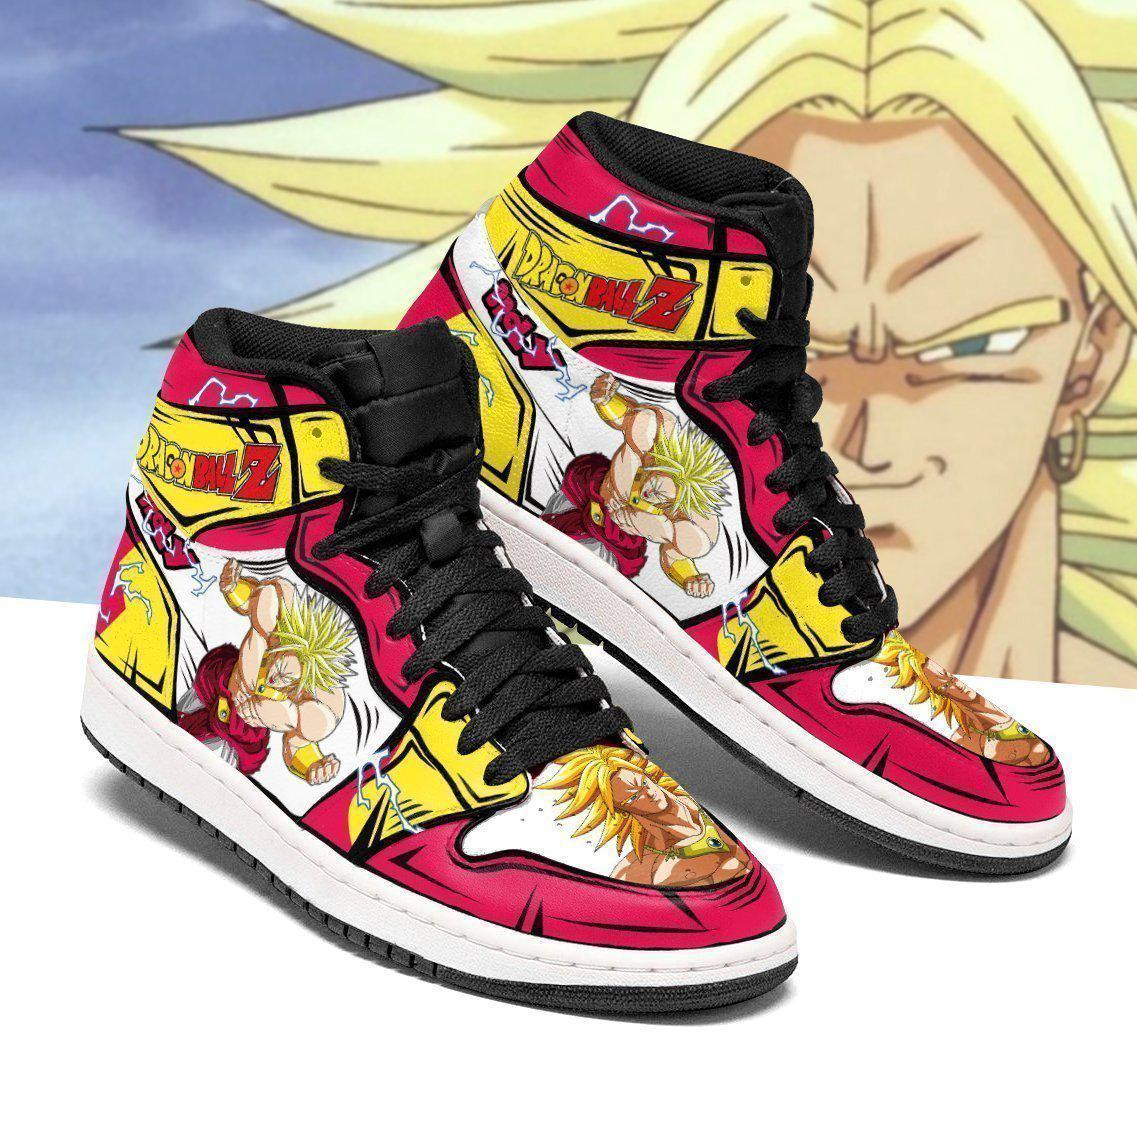 Choose for yourself a custom shoe or are you an Anime fan 22